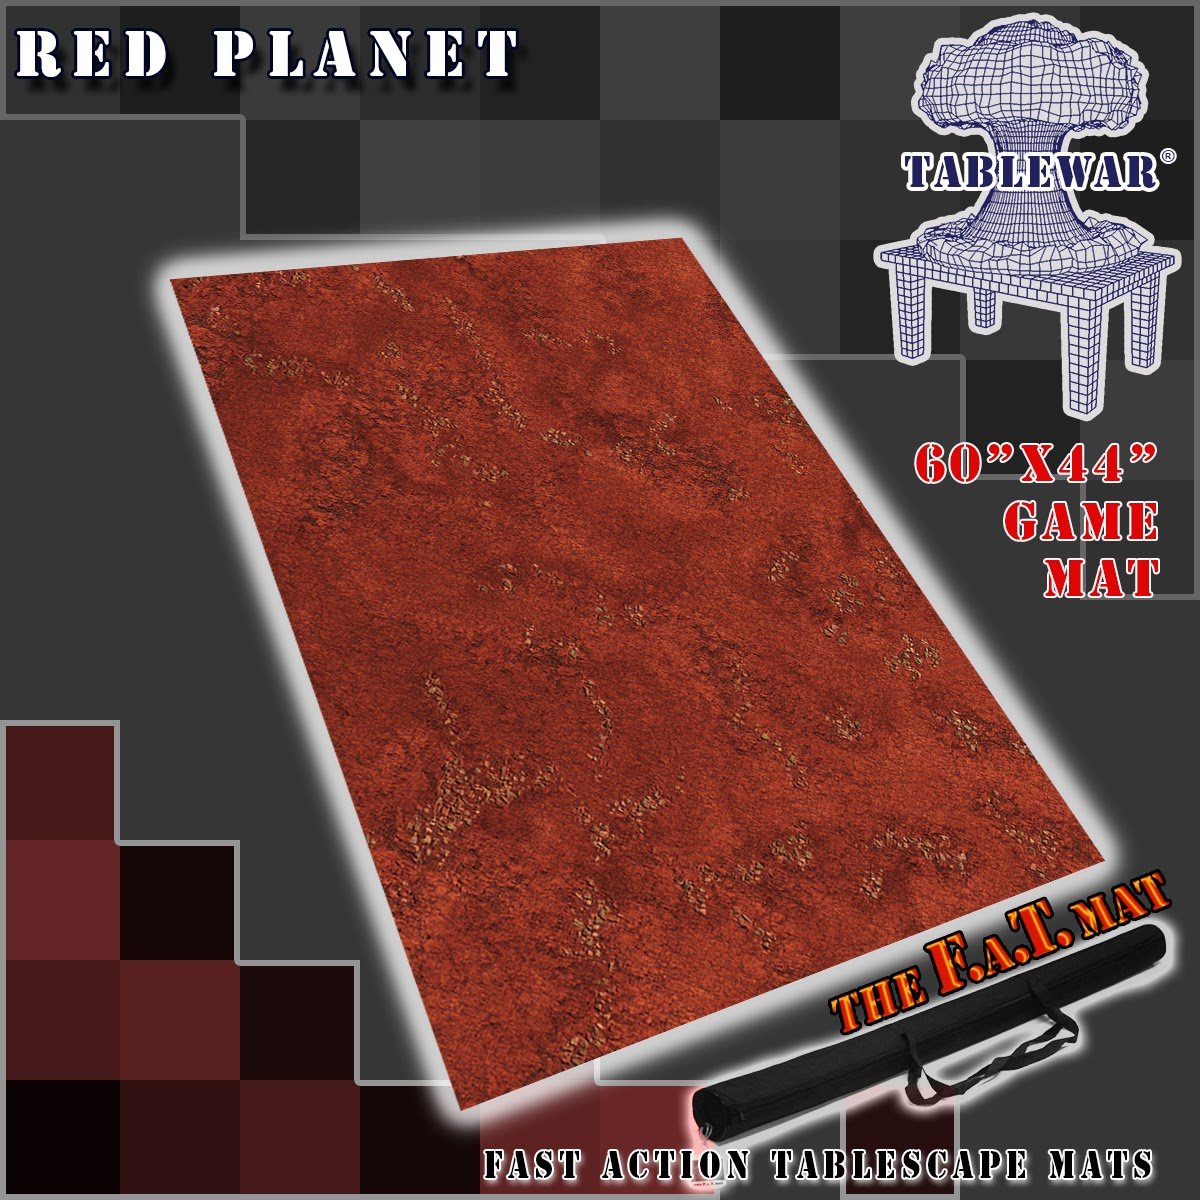 F.A.T. Mats: Red Planet 60"×44" 